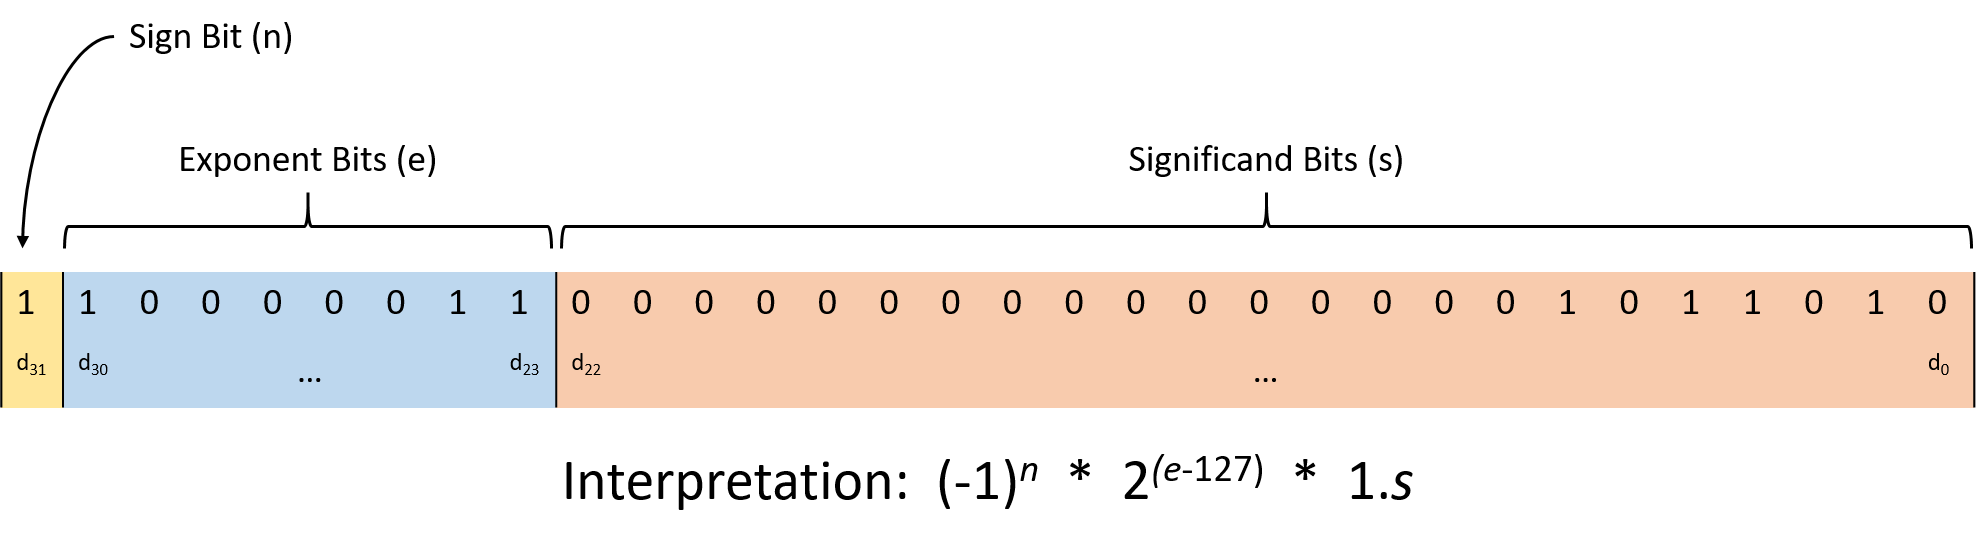 The leftmost digit represents the sign bit.  The next eight bits represent the exponent, and the remaining 23 bits represent the significand.